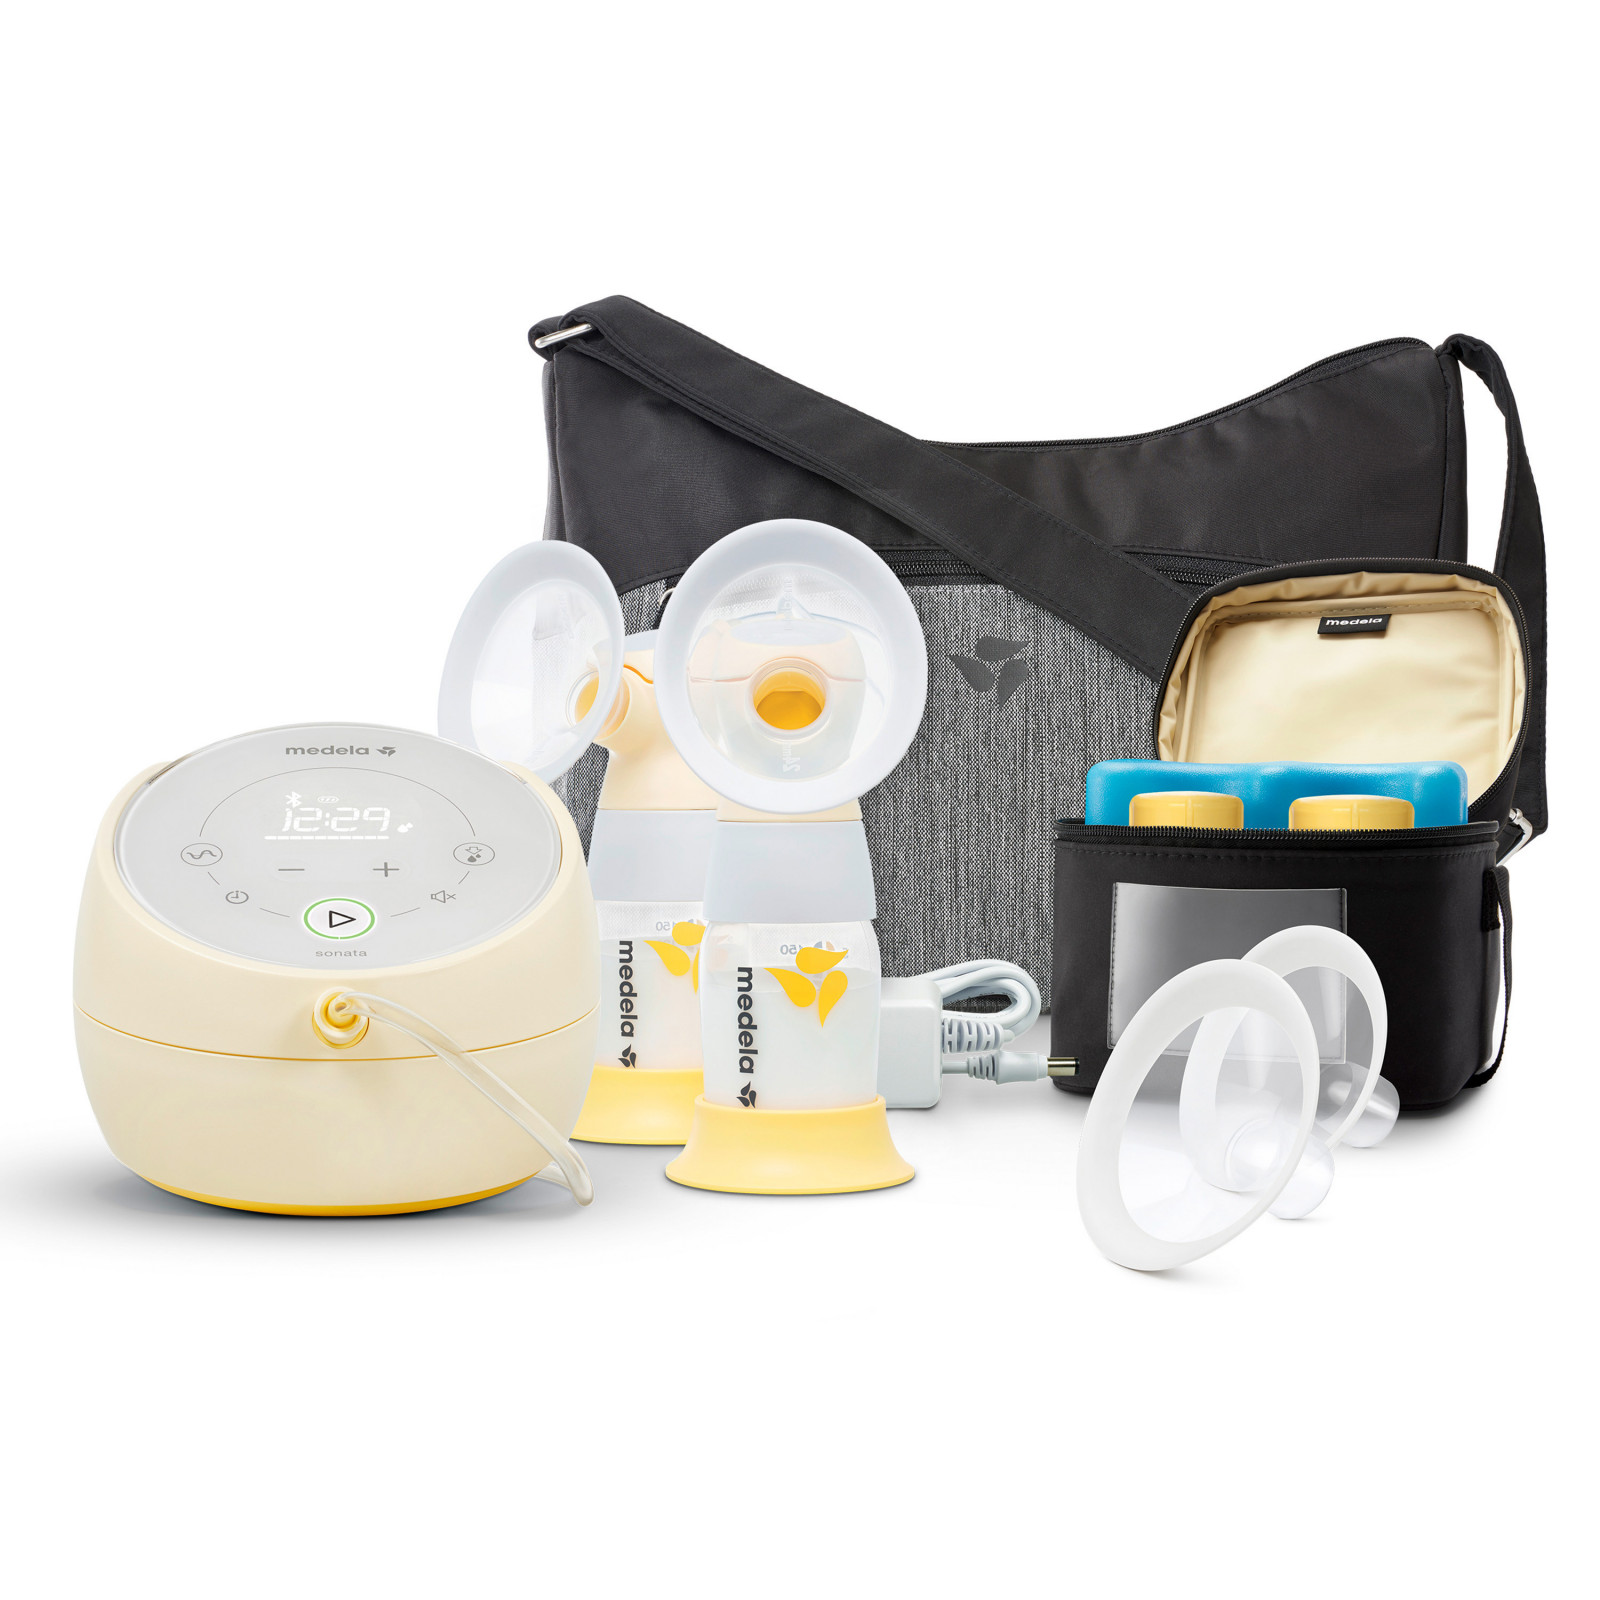 Smart breast pump featured at CES lets moms multitask